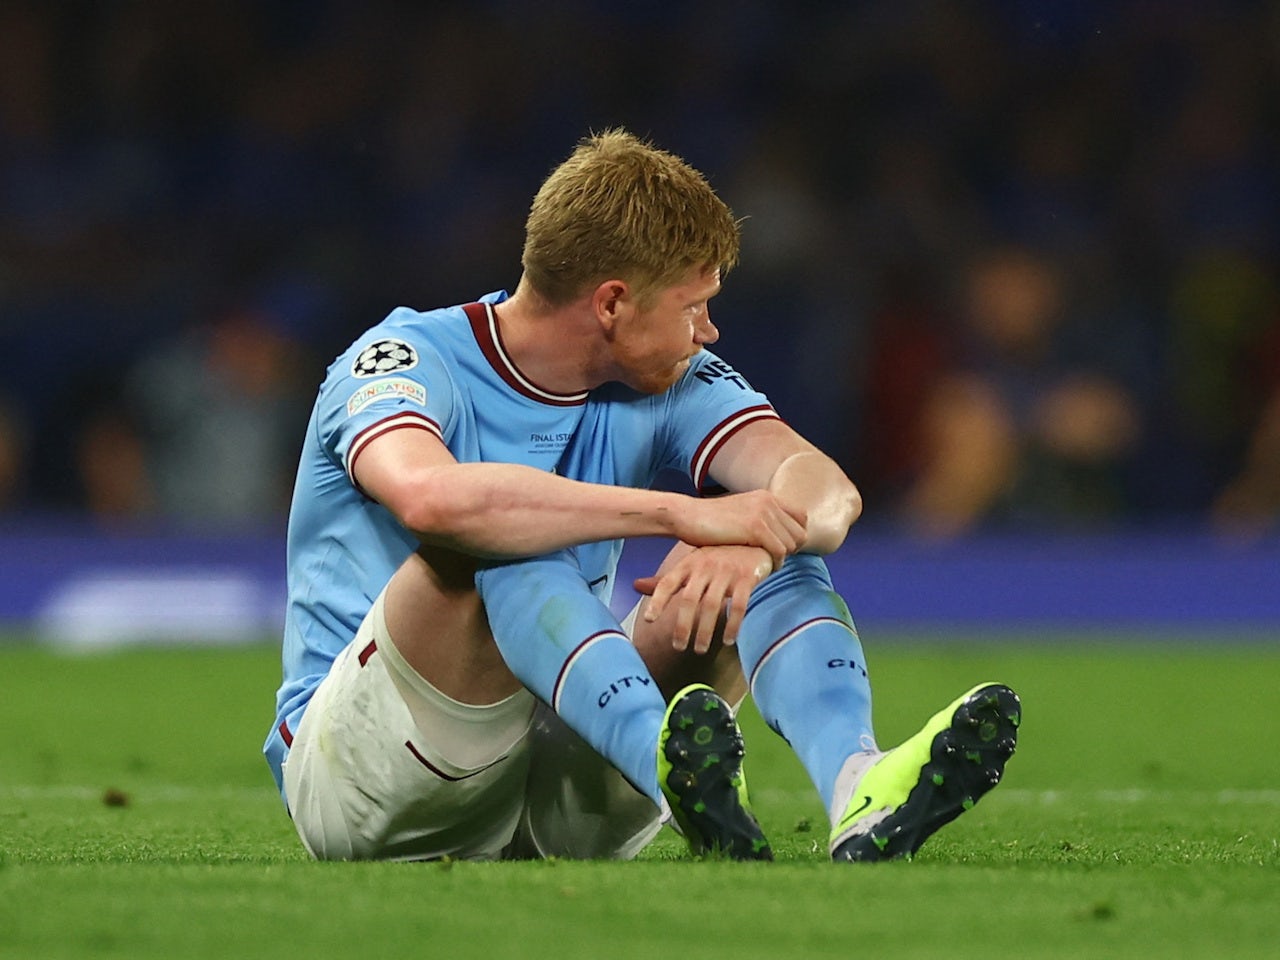 Manchester City's Kevin De Bruyne to miss start of next season?